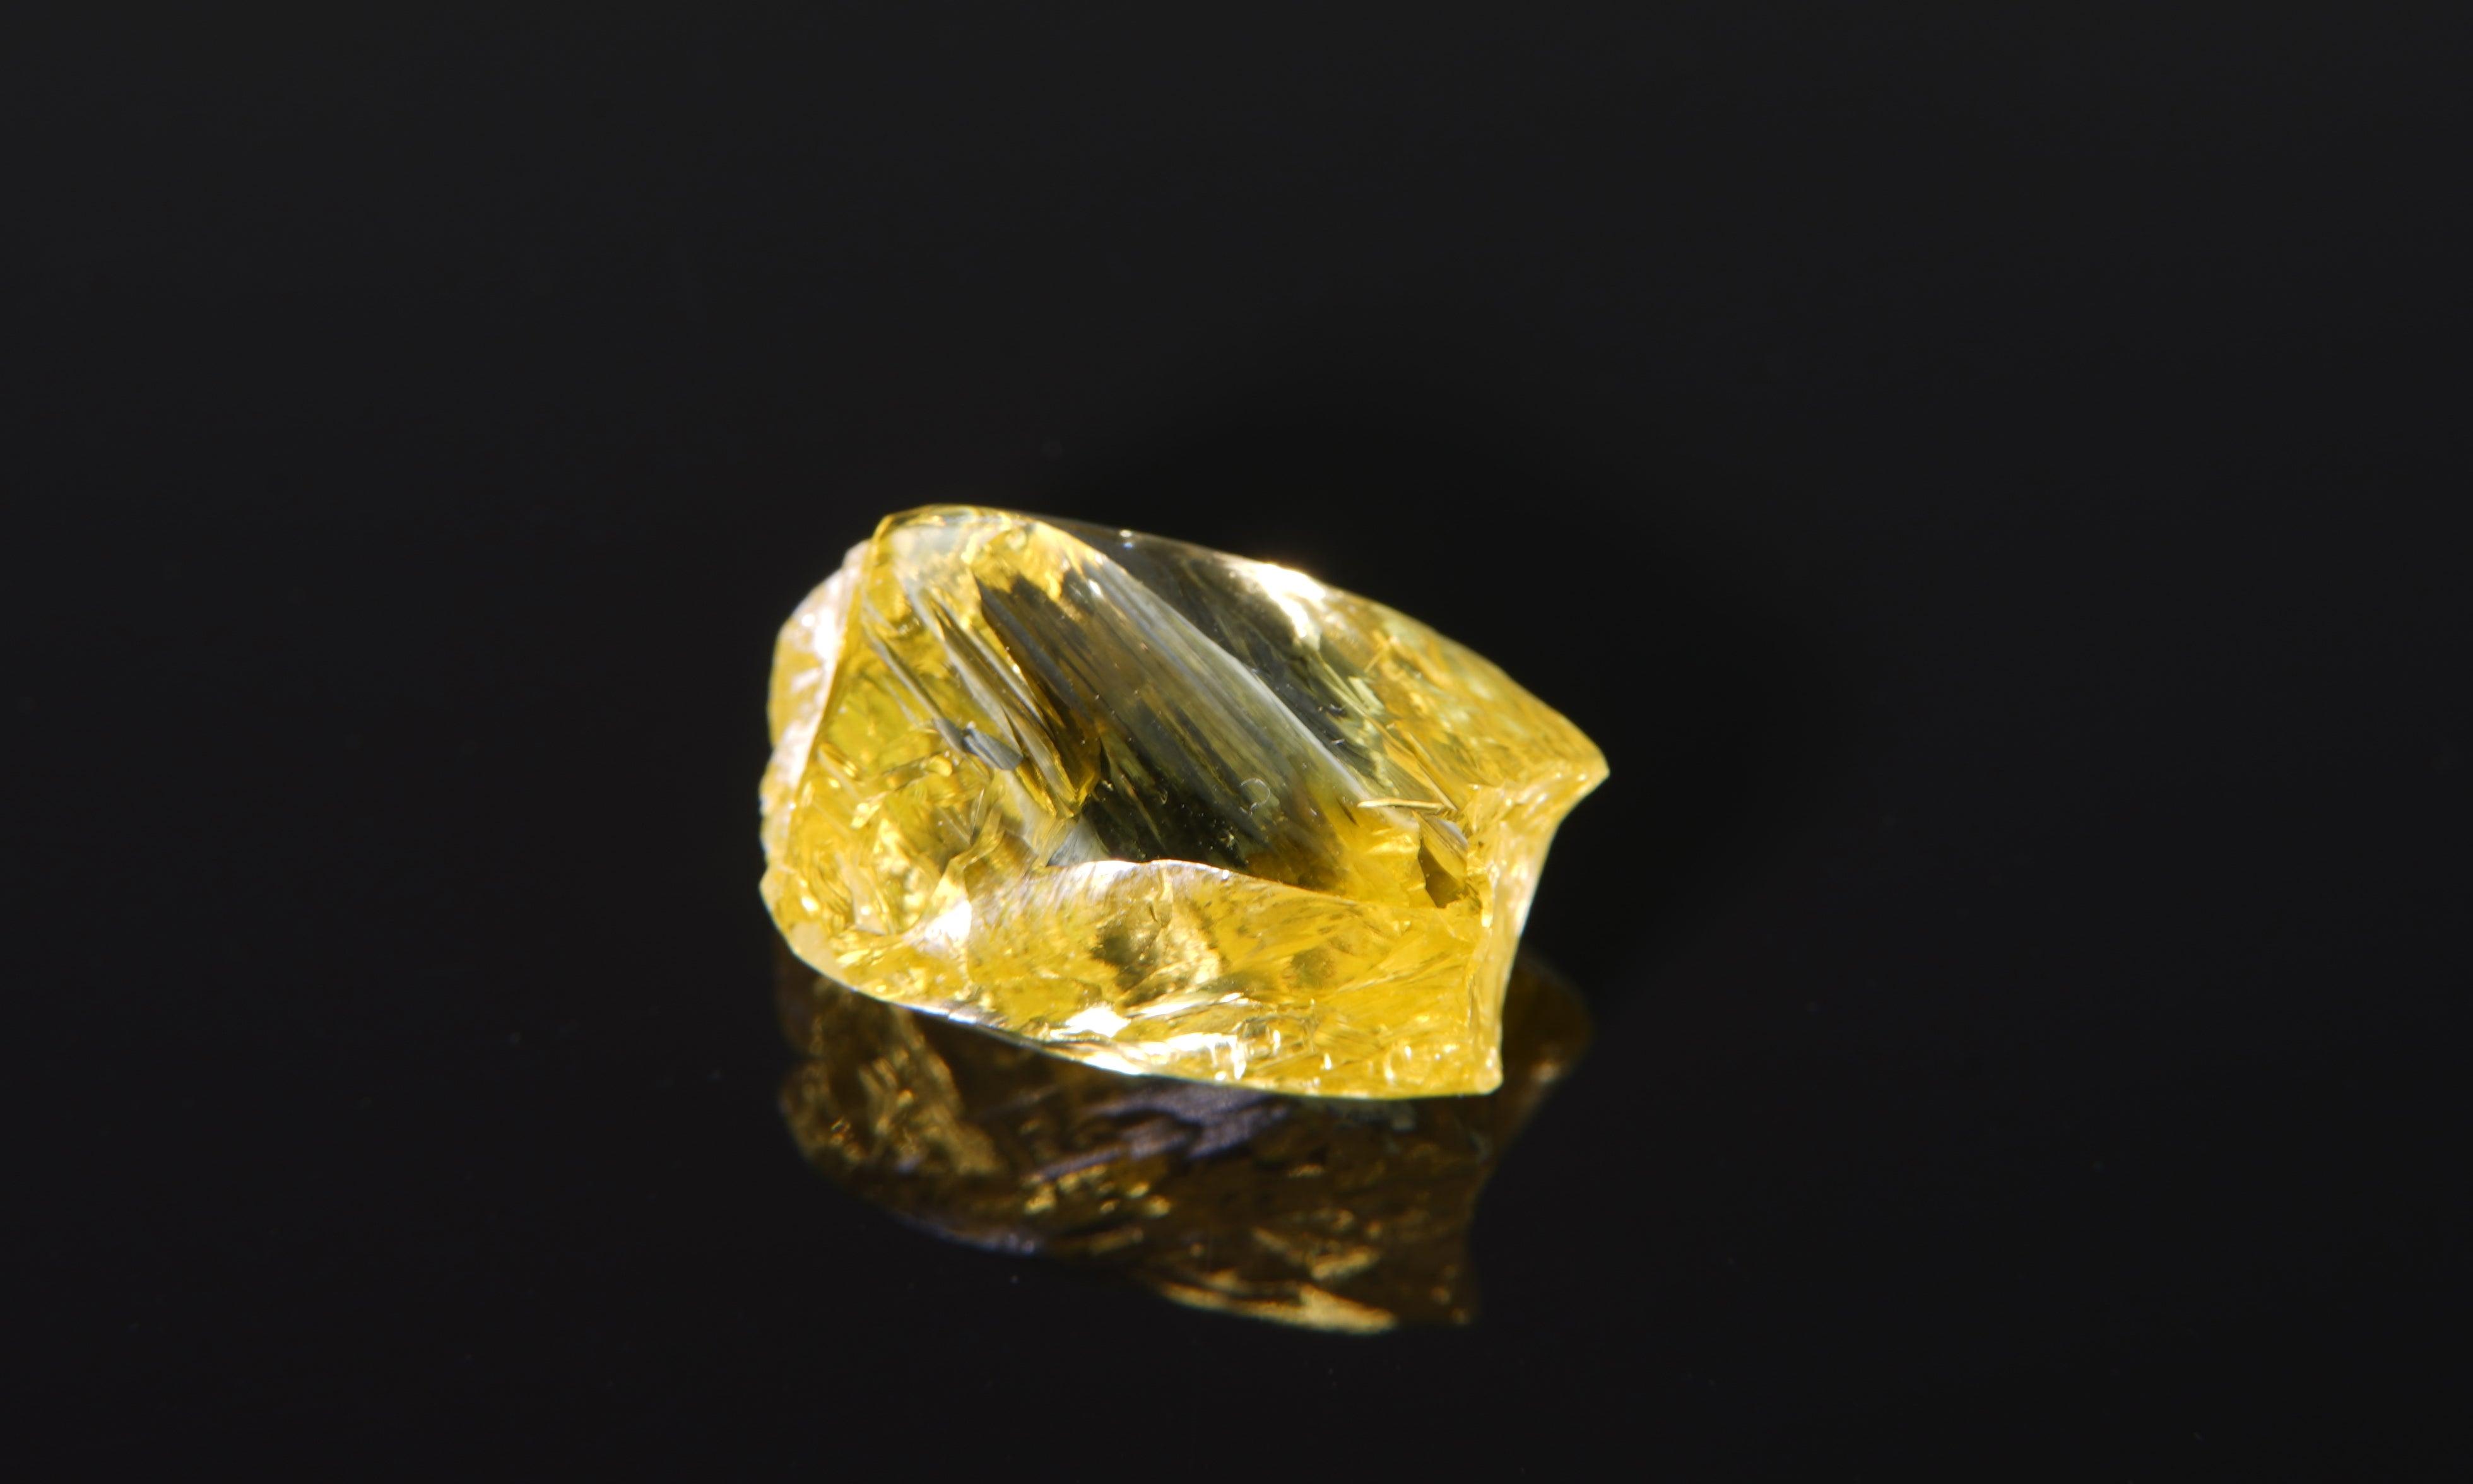 Alrosa Unearthed First Colored Rough Diamond at its New Verkhne-Munskoye Deposit in Yakutia.